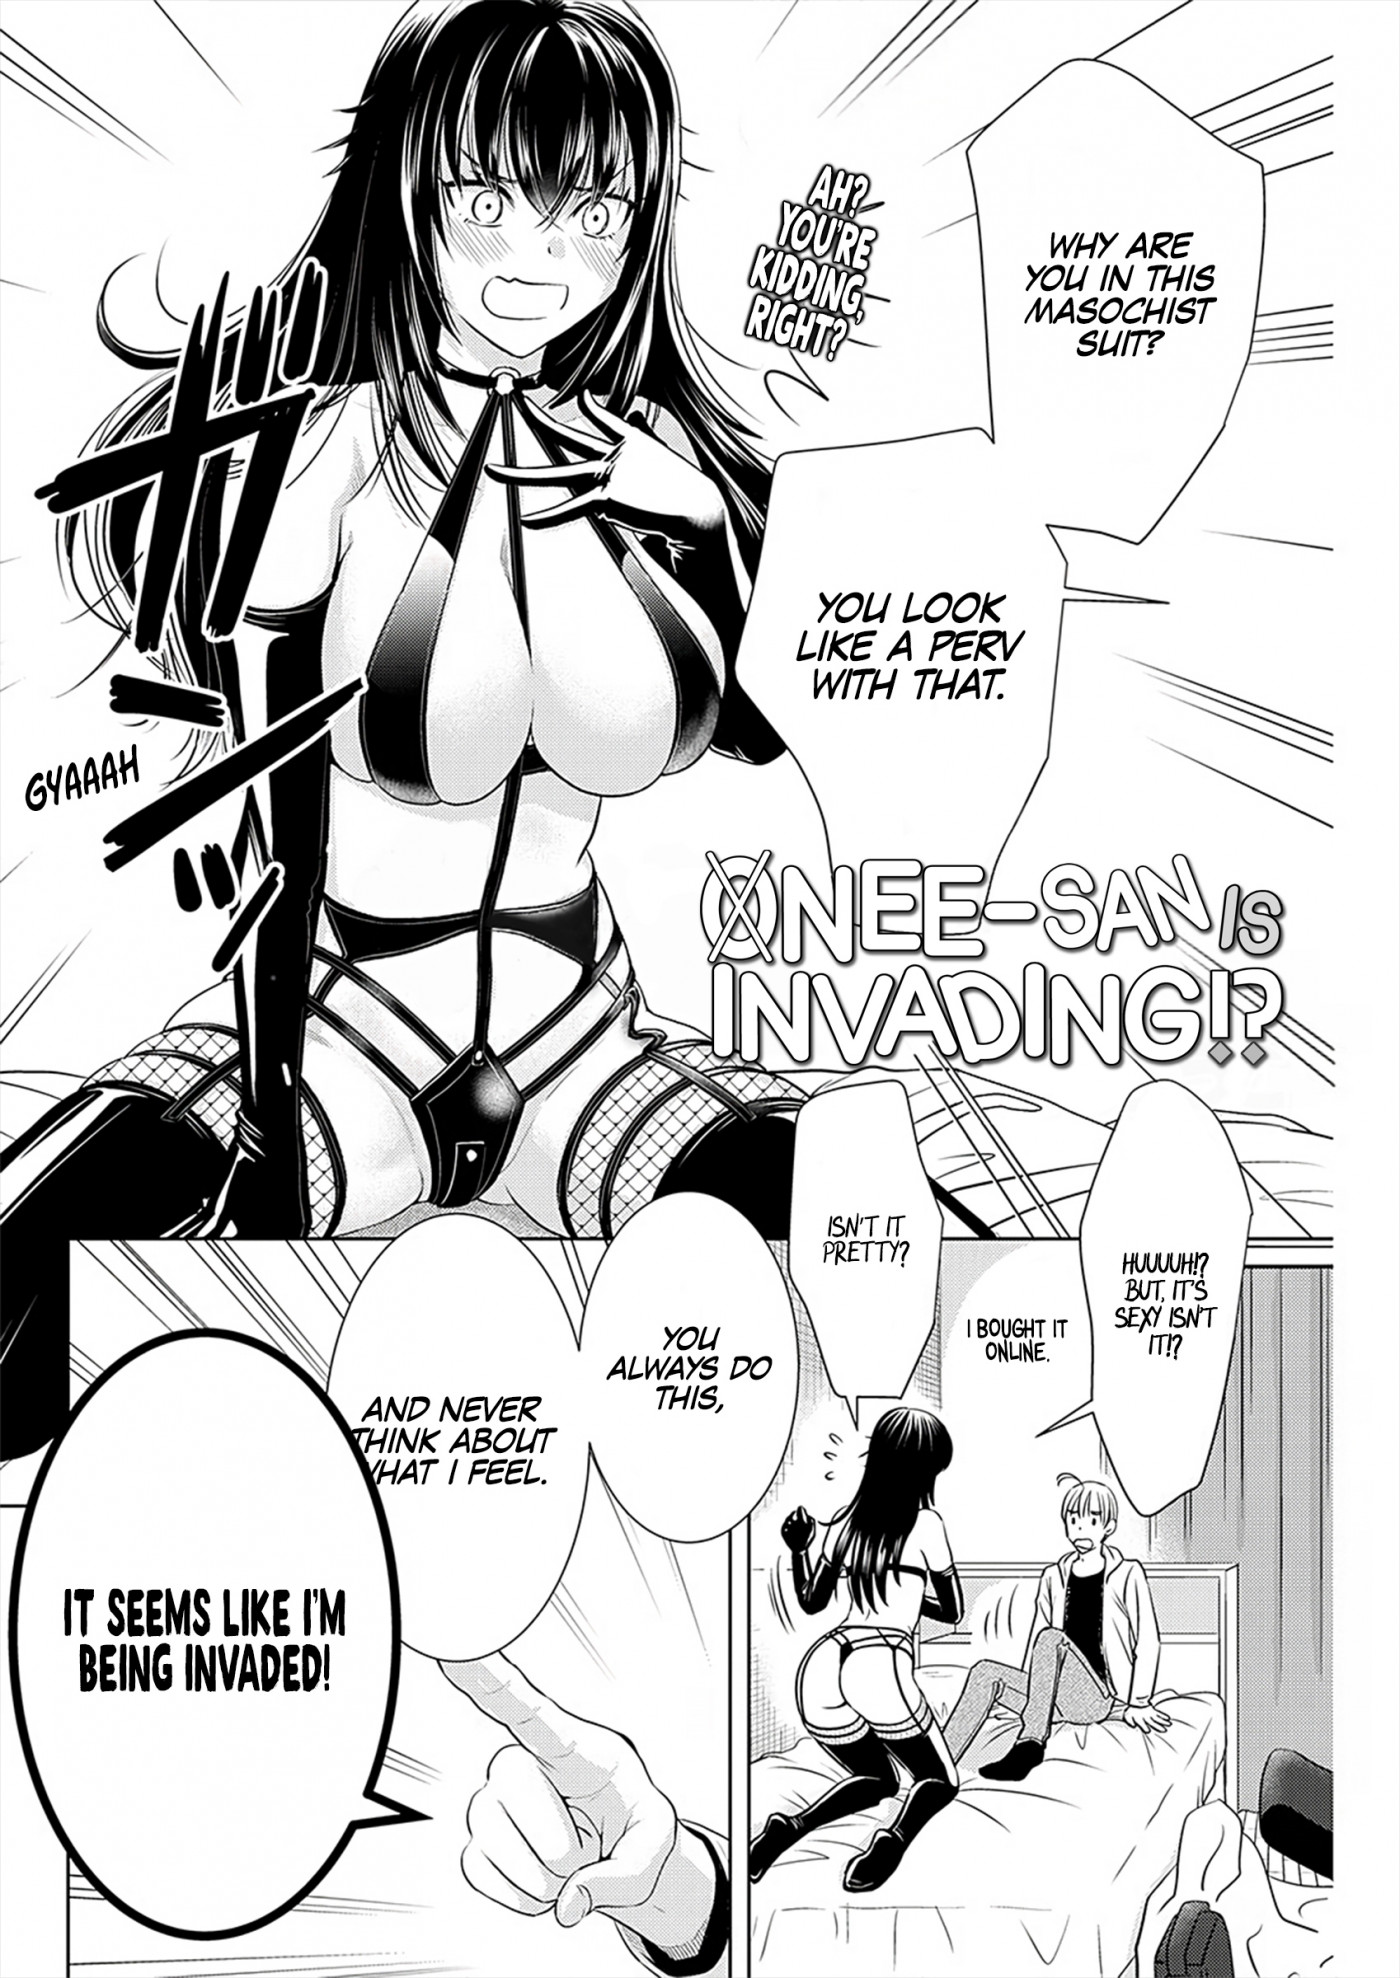 Onee-San Is Invading!? - Page 3